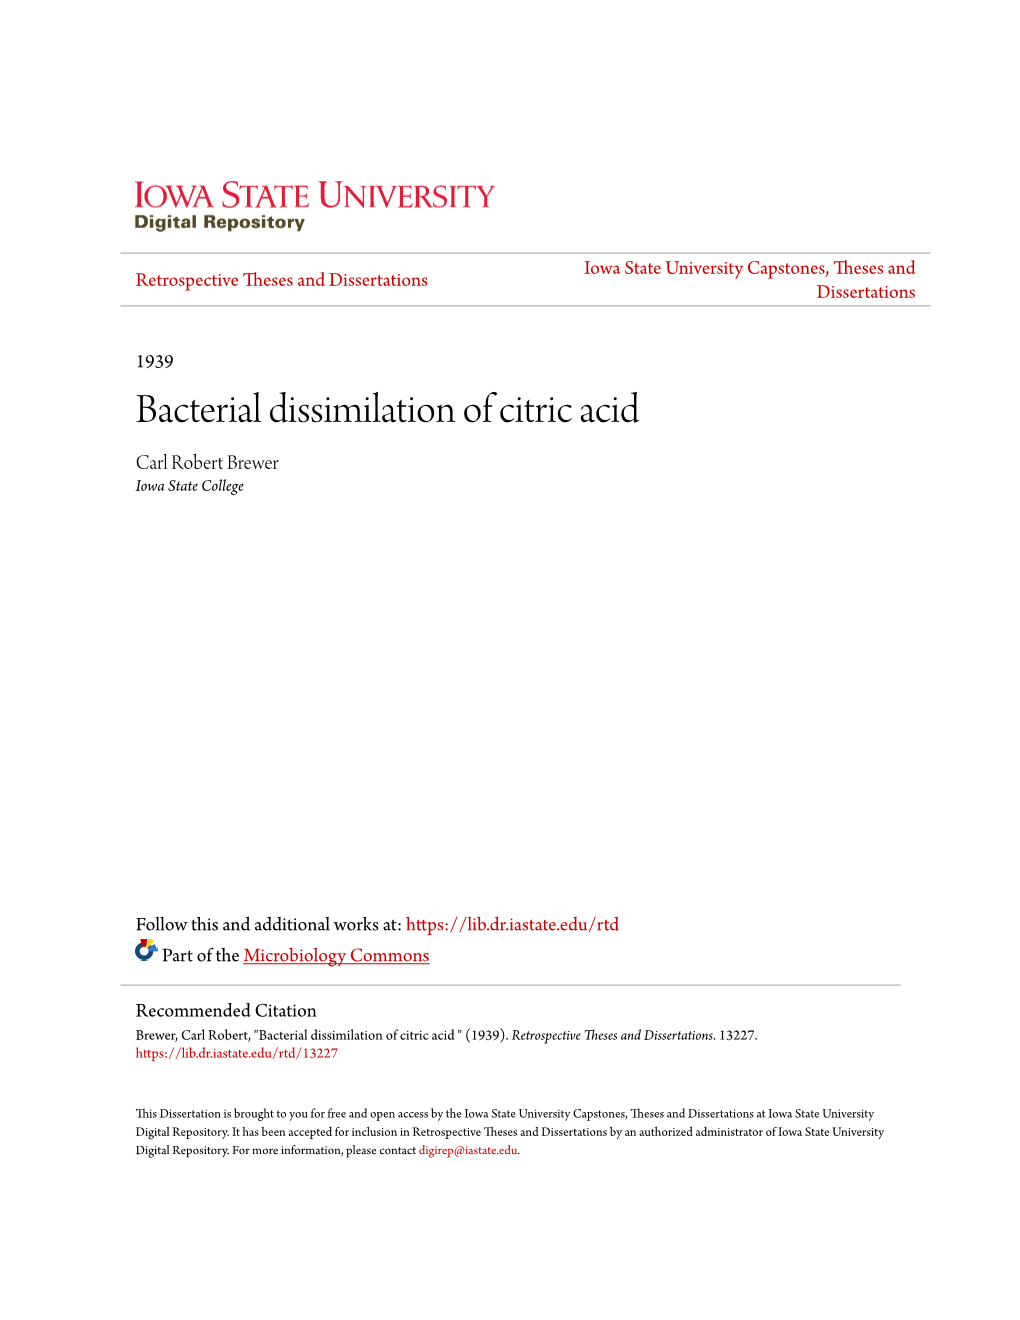 Bacterial Dissimilation of Citric Acid Carl Robert Brewer Iowa State College